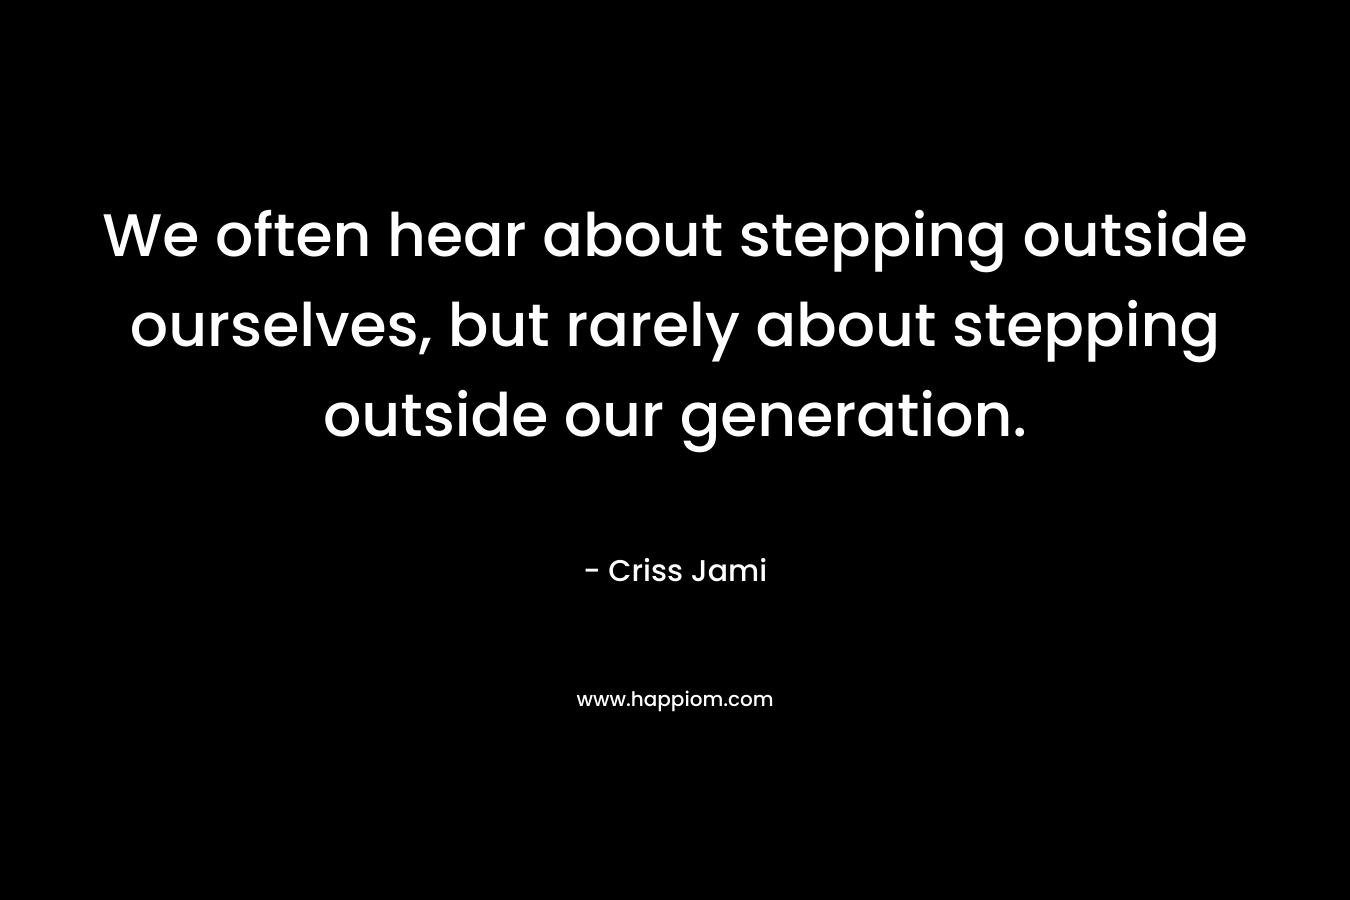 We often hear about stepping outside ourselves, but rarely about stepping outside our generation.